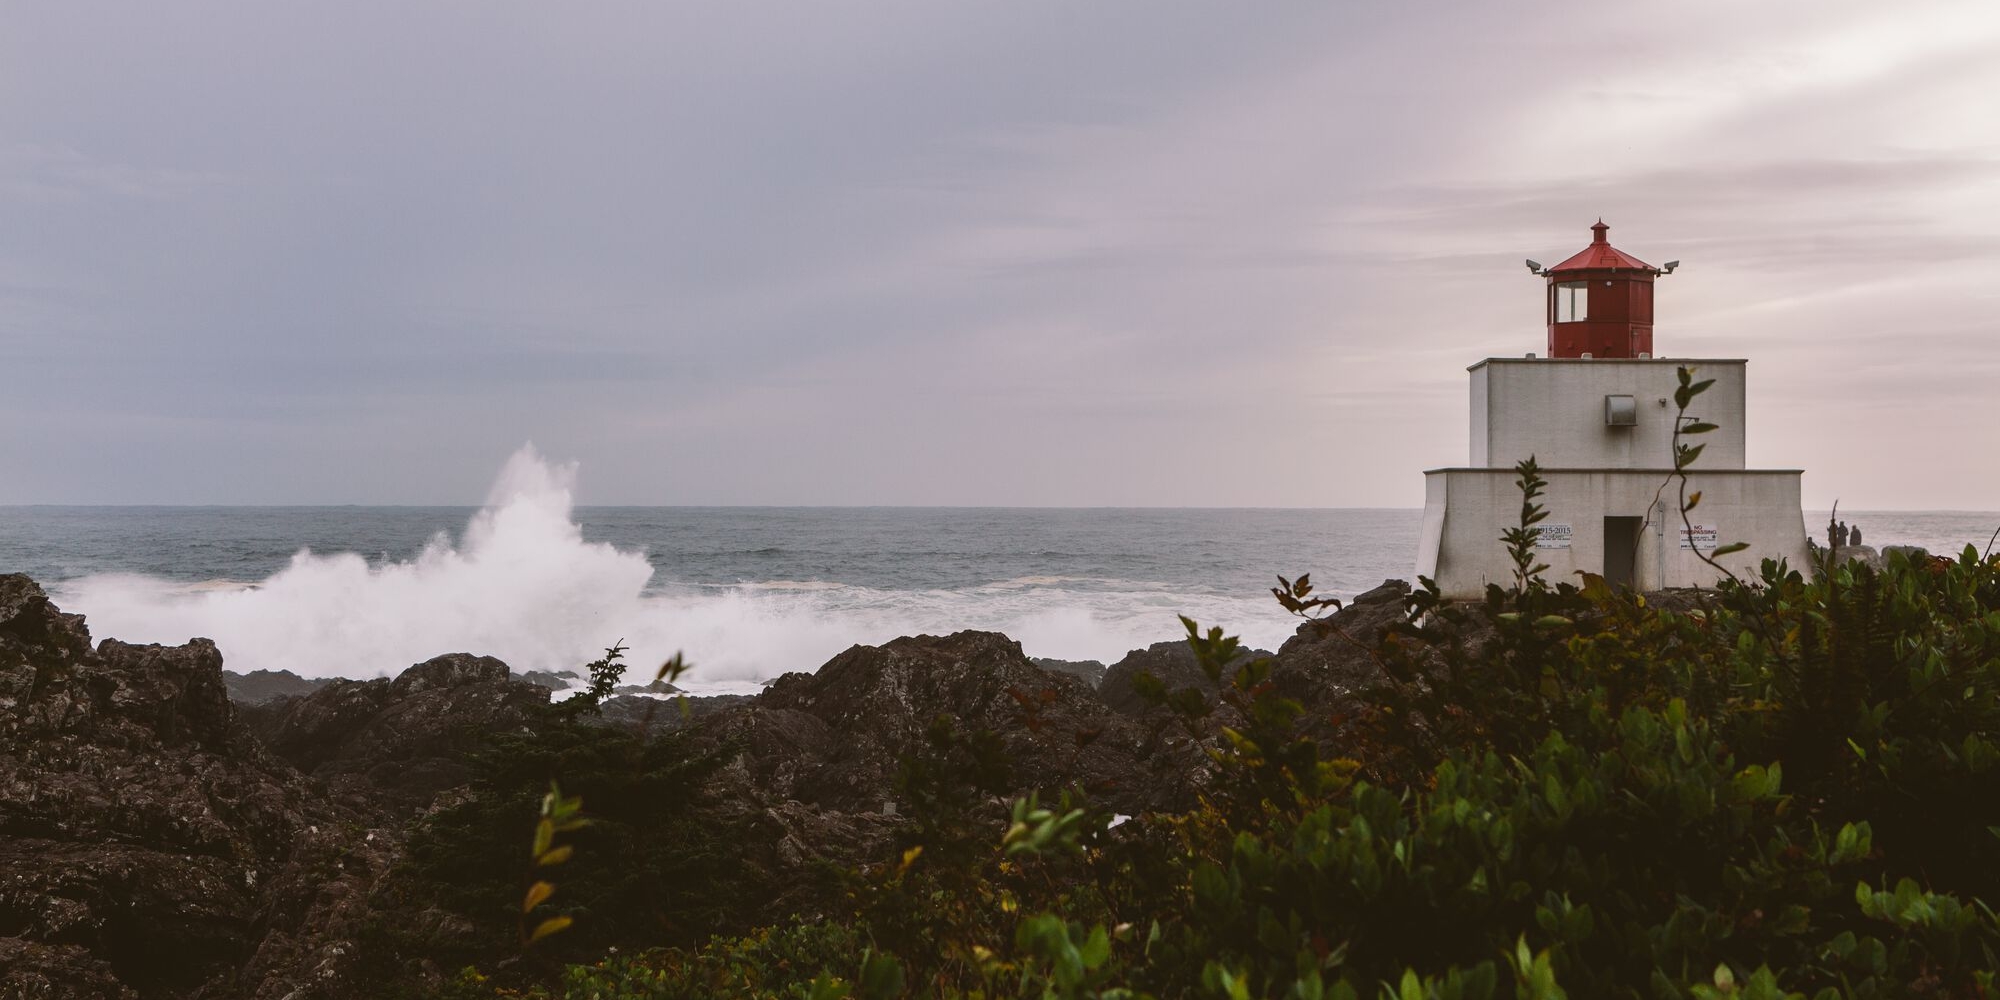 A short white lighthouse with a red top sits on the right side of the image o a rocky shorline with waves breaking in the background.